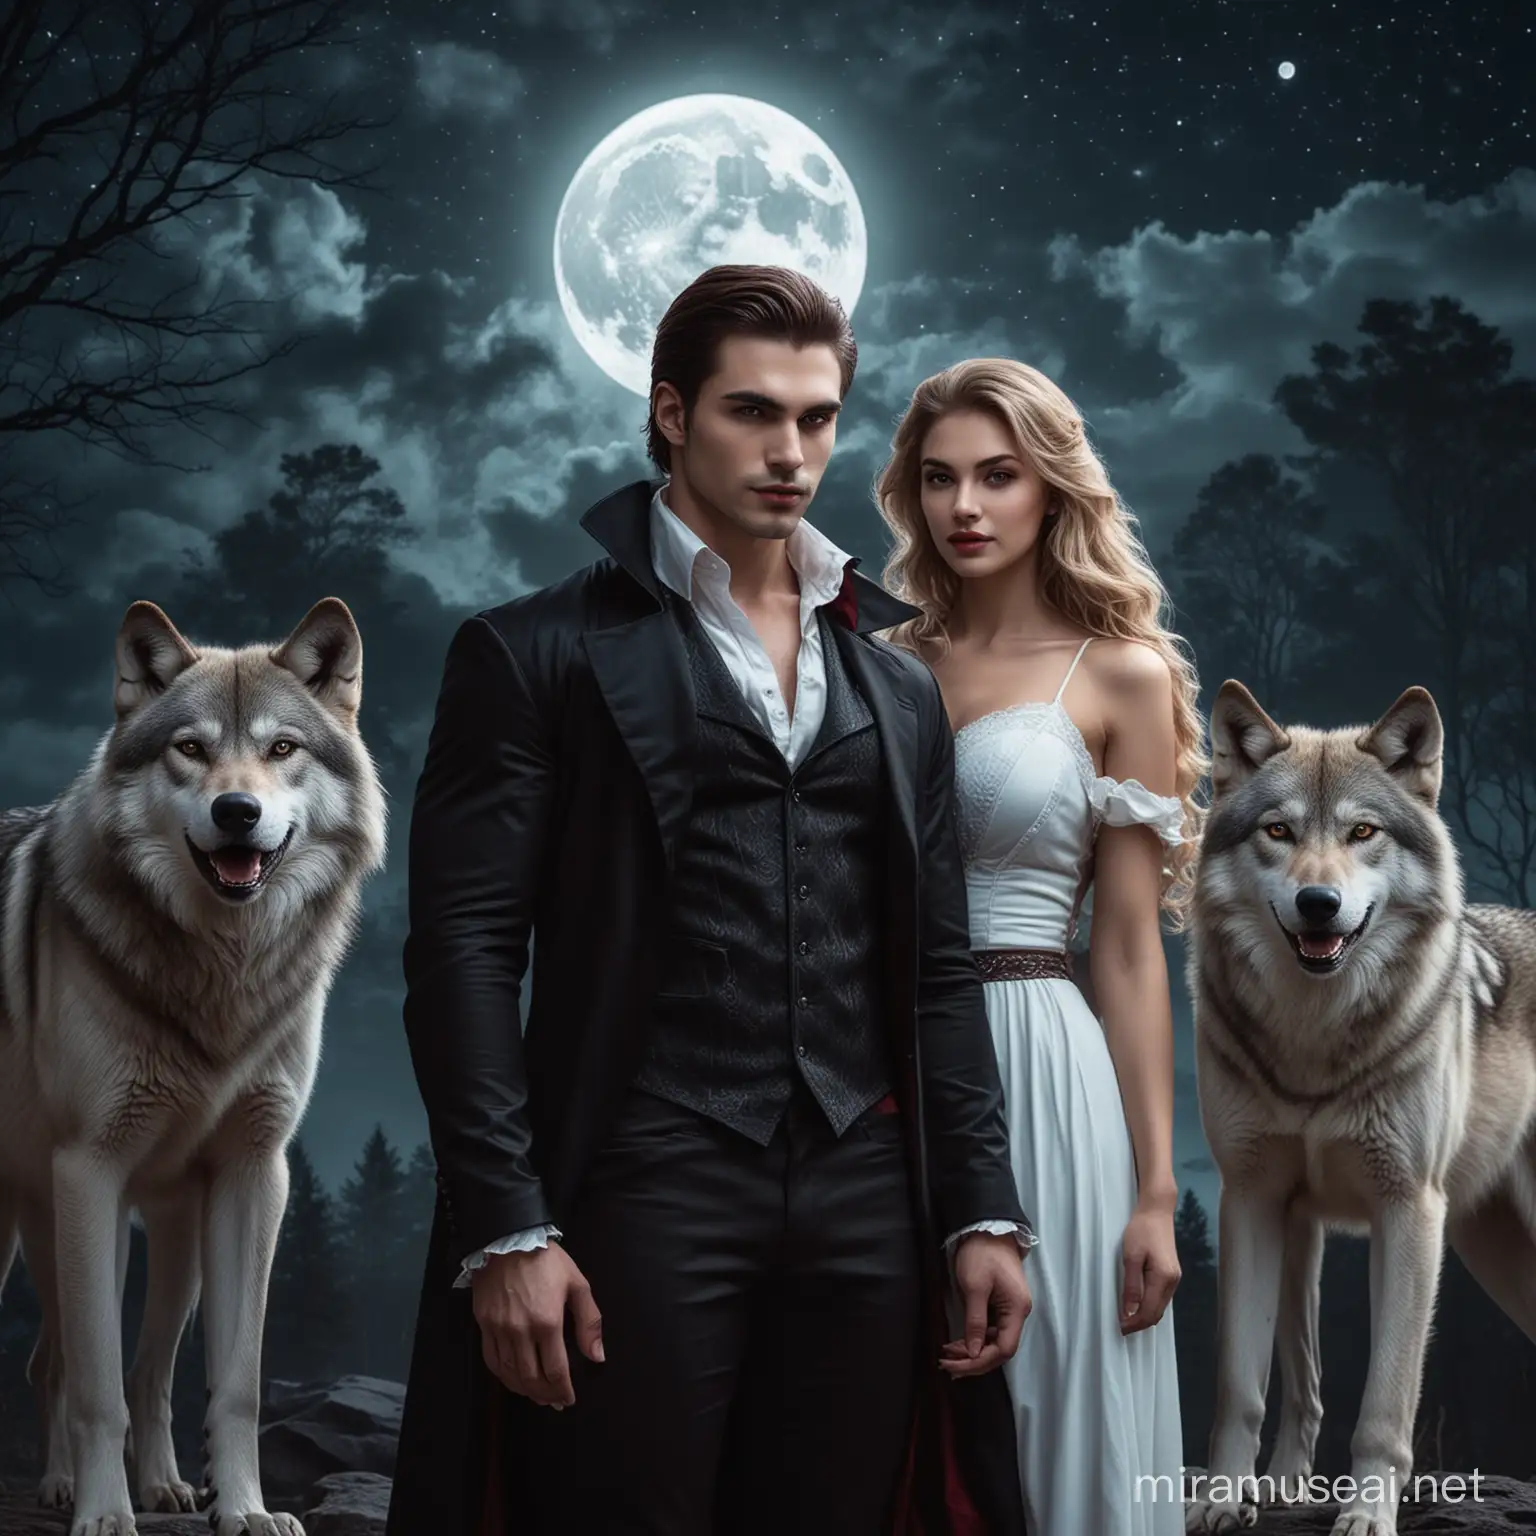 Mystical Encounter Handsome Vampire and Beautiful Woman with Wolves under Moonlit Sky